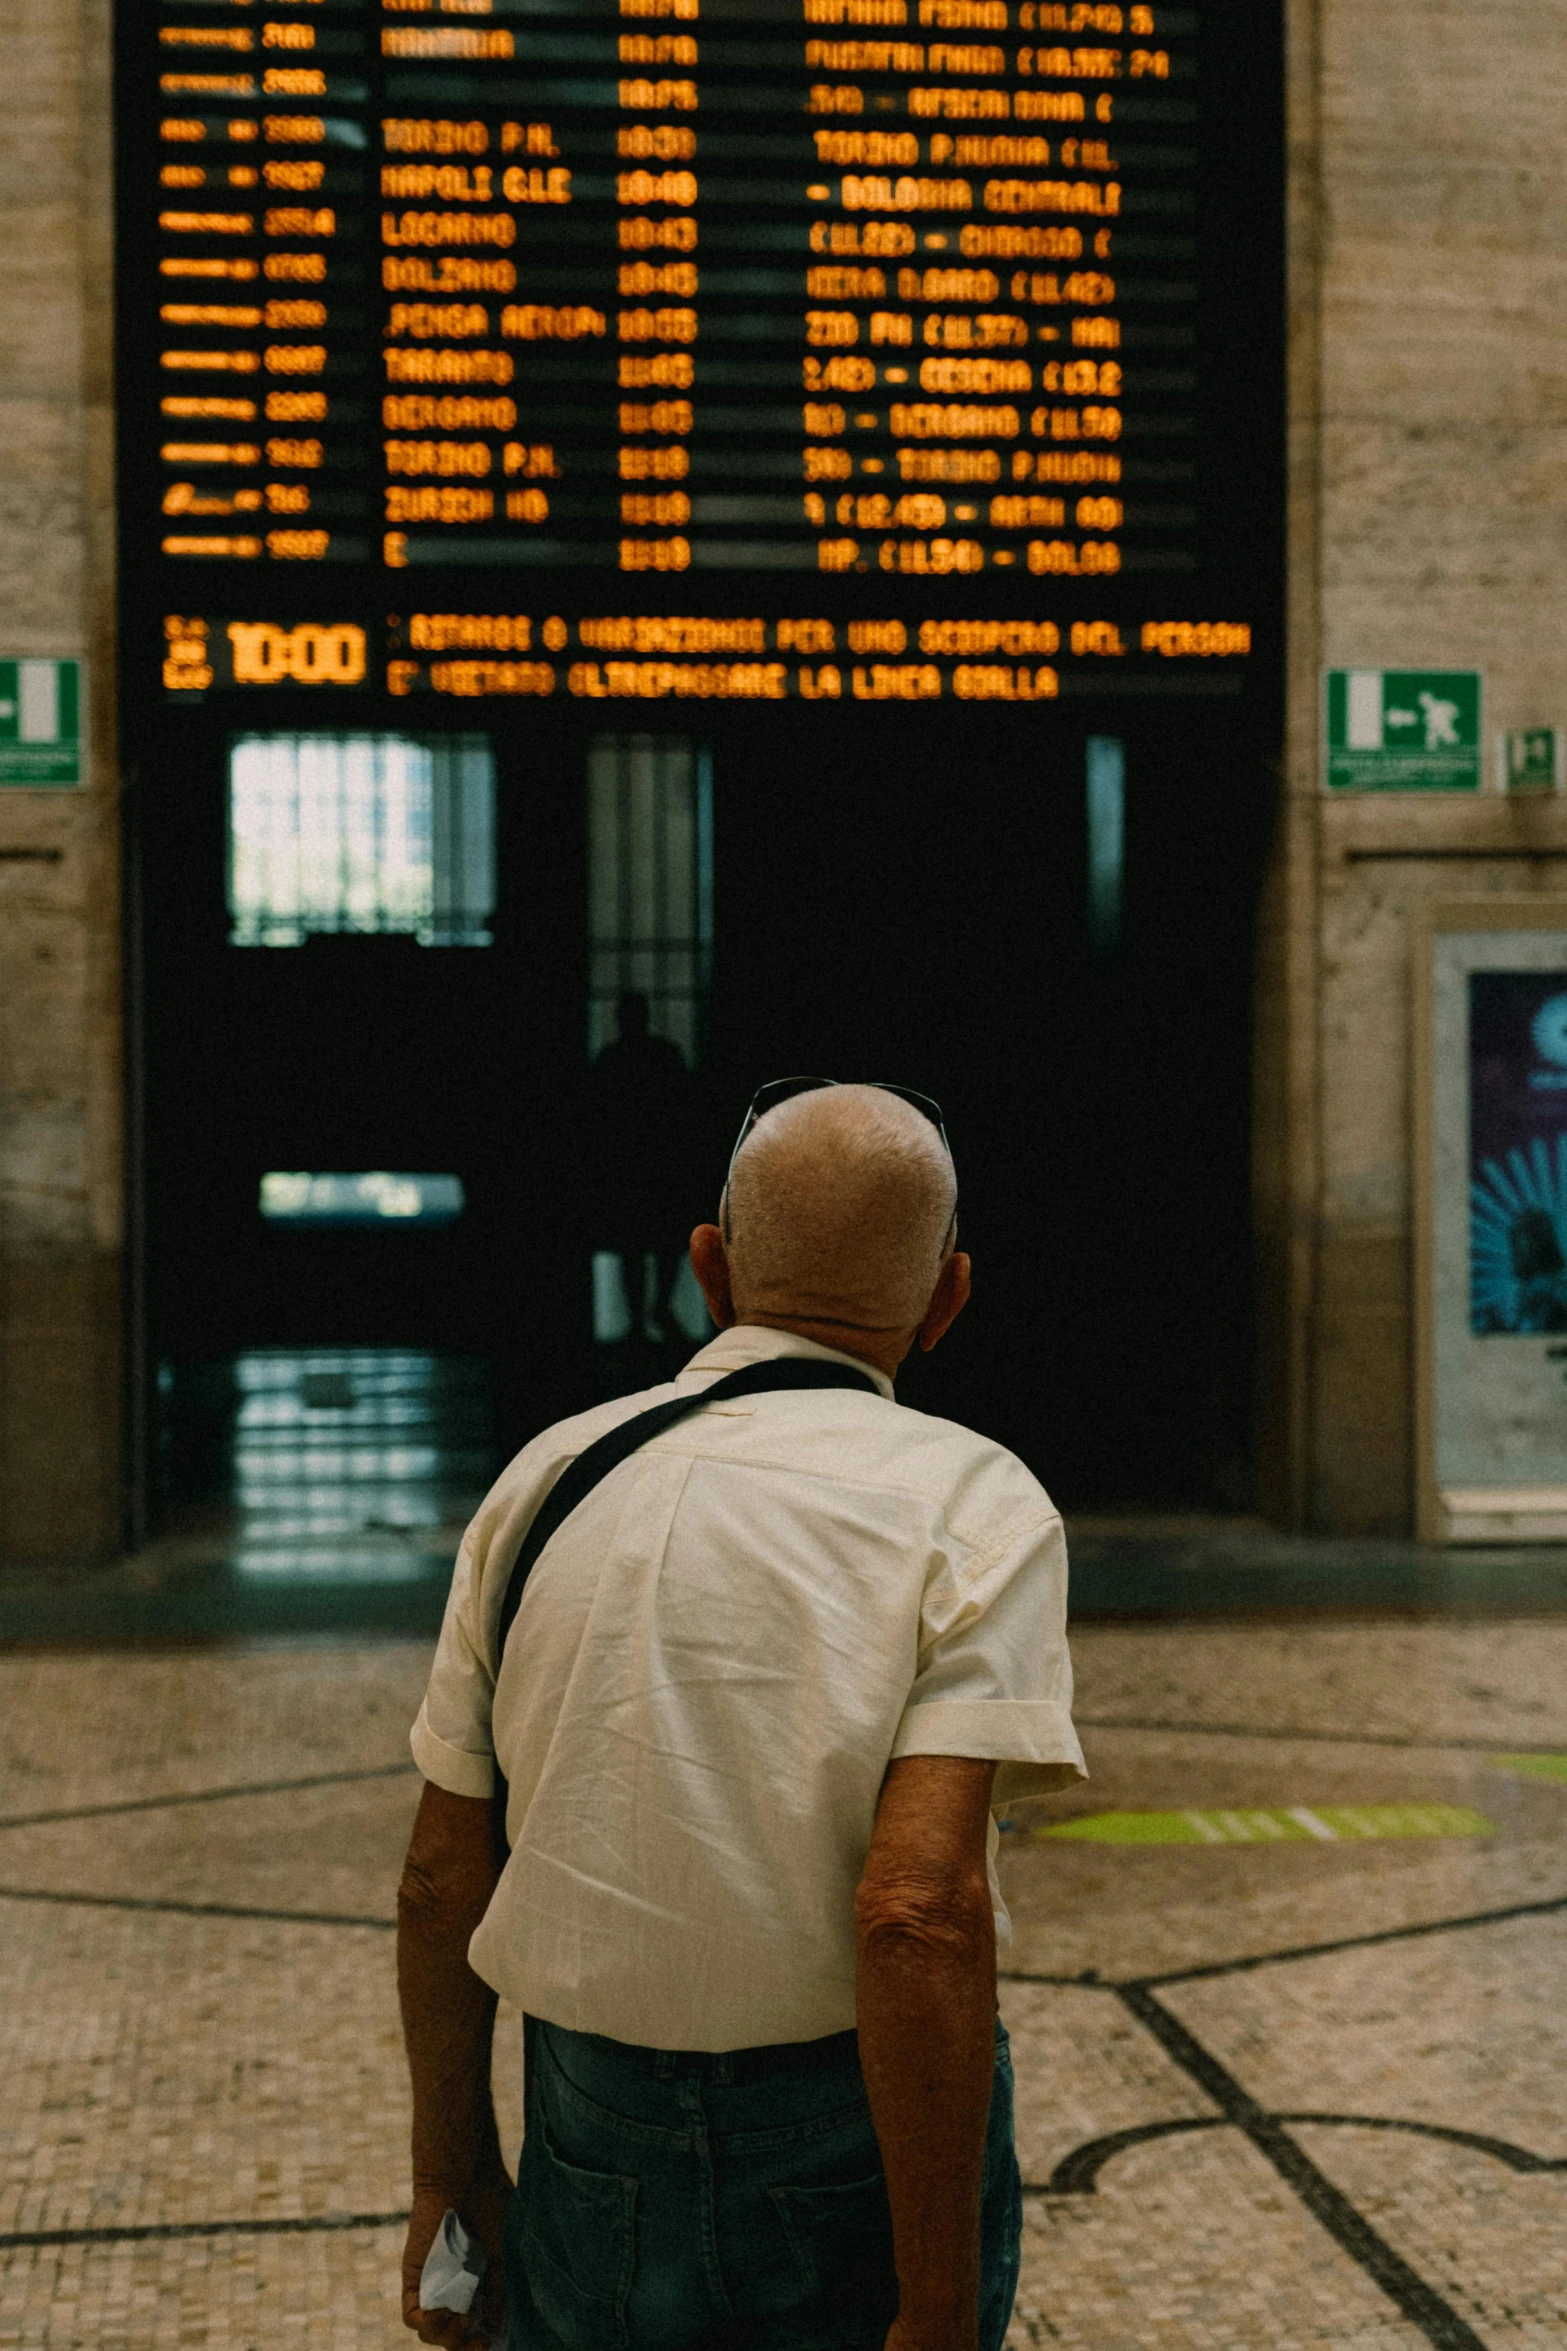 a man is watching an airport sign that tells time in roman numerals